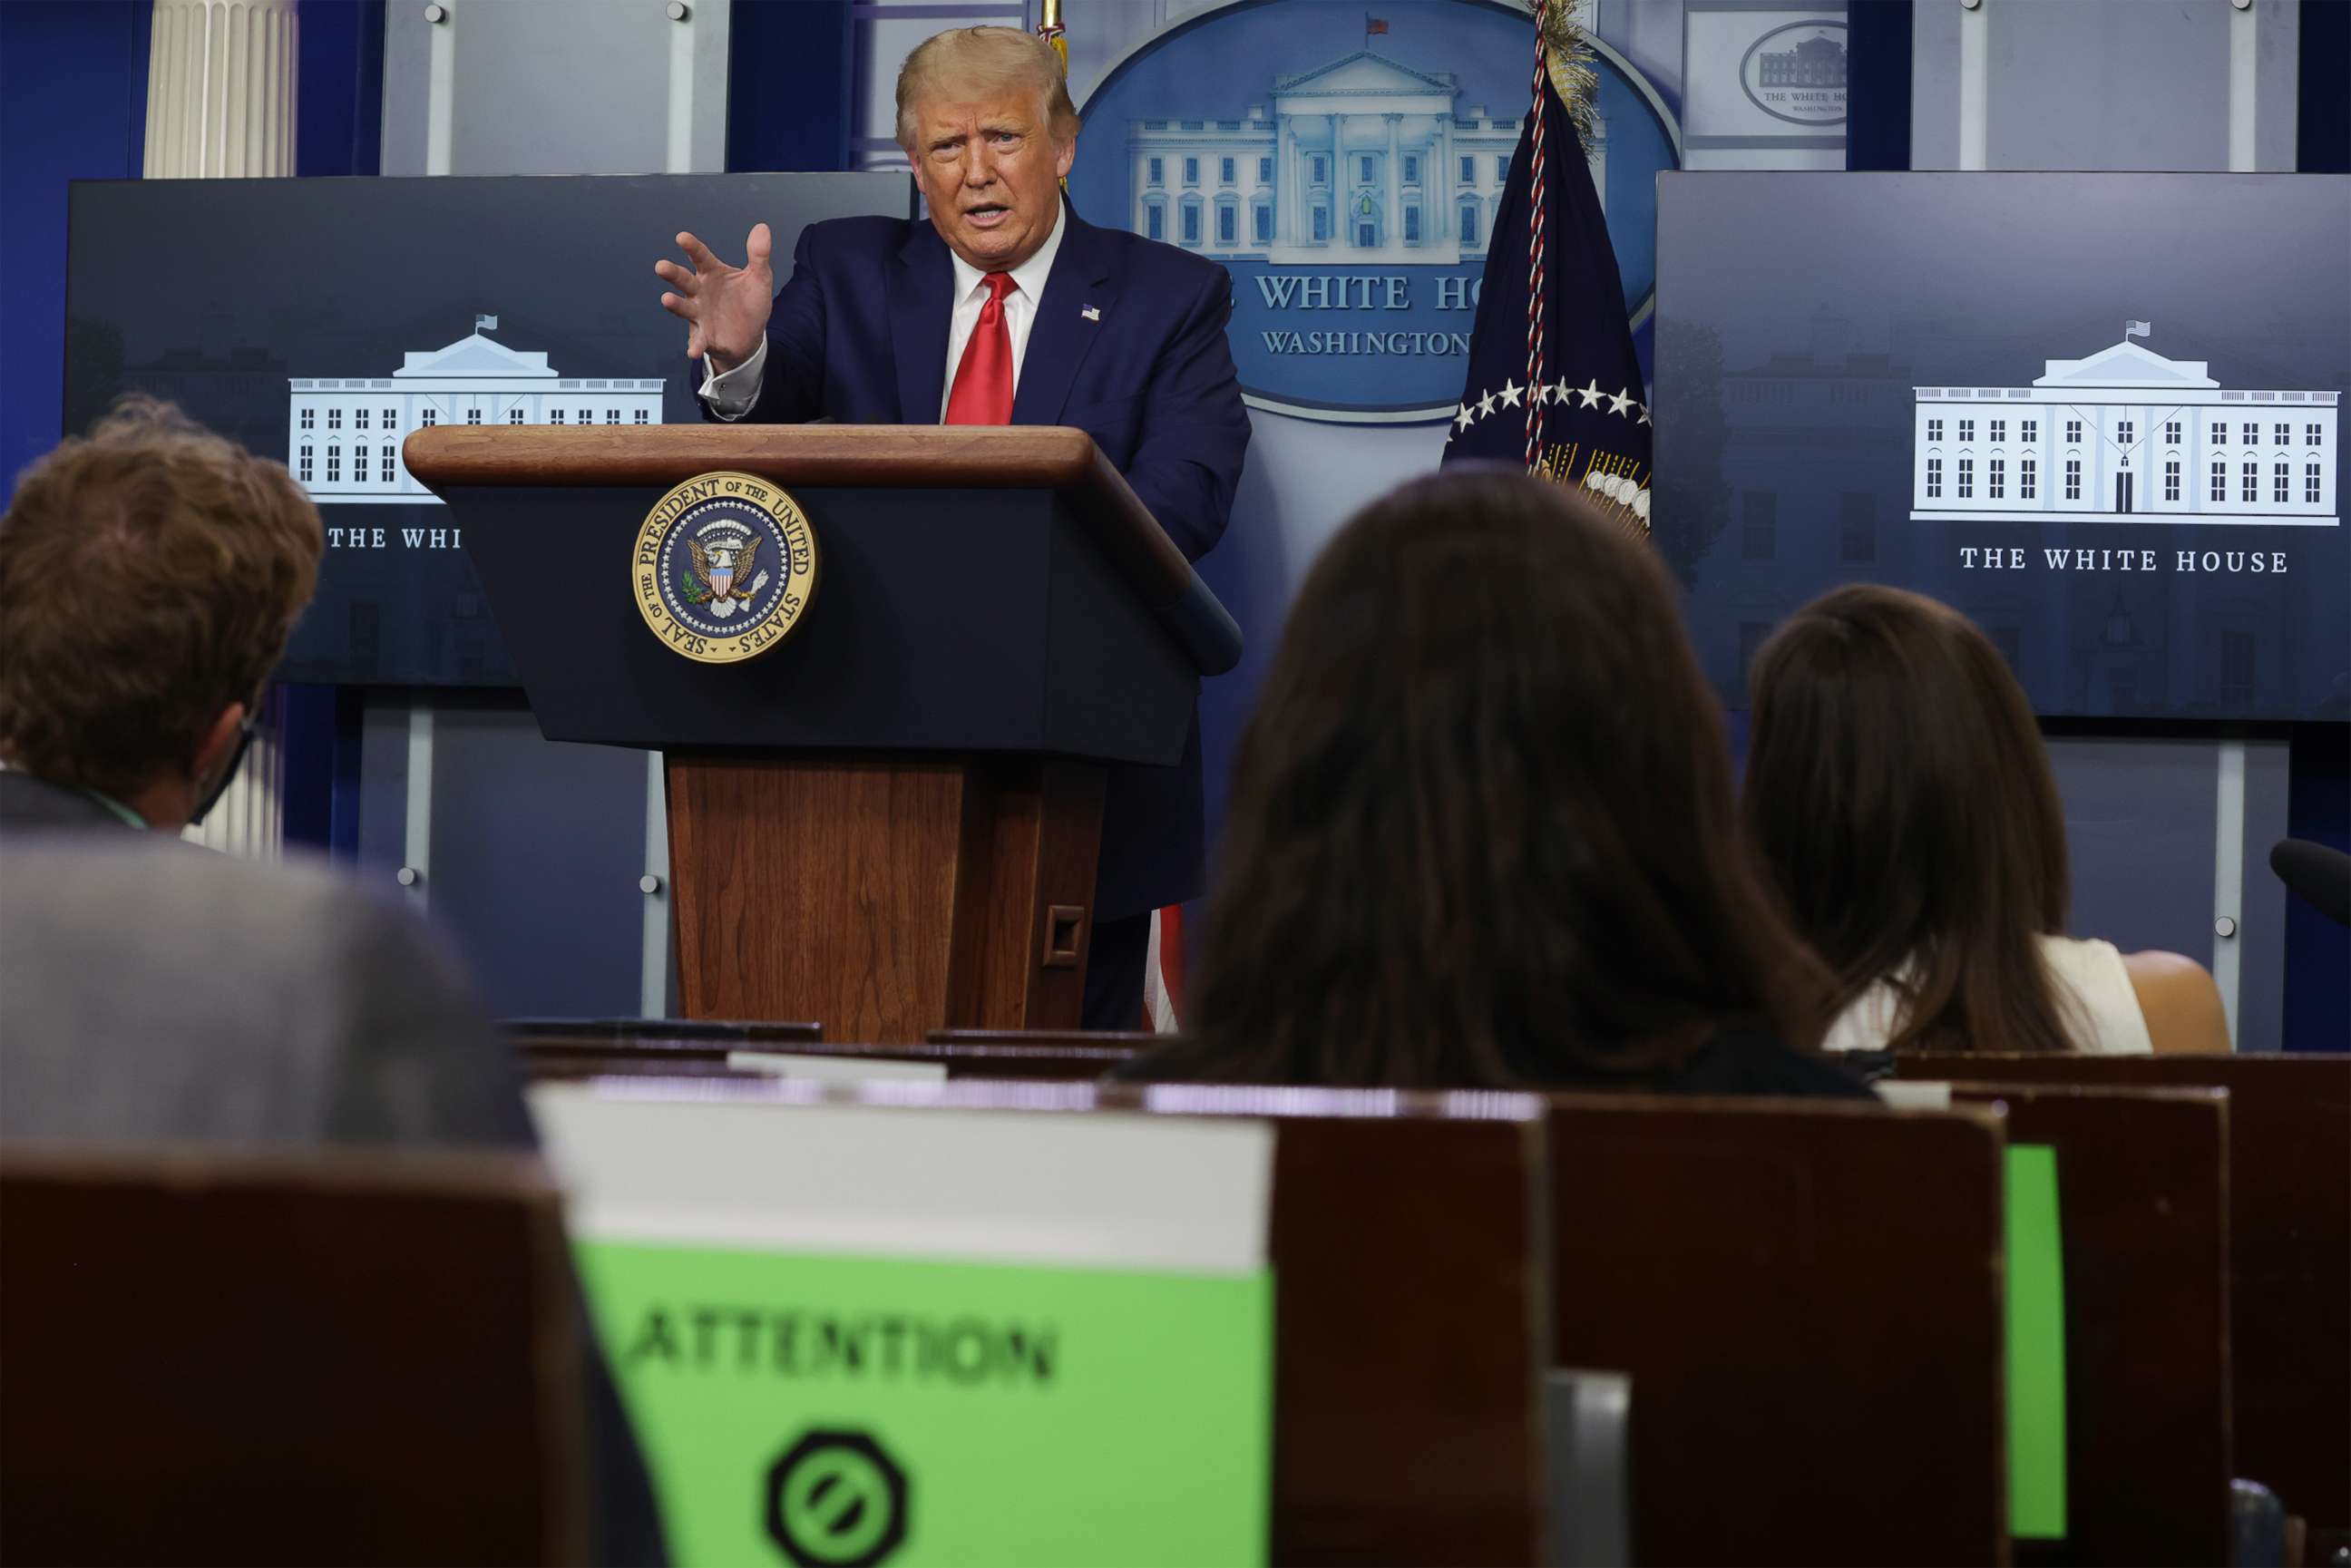 PHOTO: President Donald Trump speaks to the press during a news conference in the James Brady Press Briefing Room of the White House on Sept. 16, 2020, in Washington.